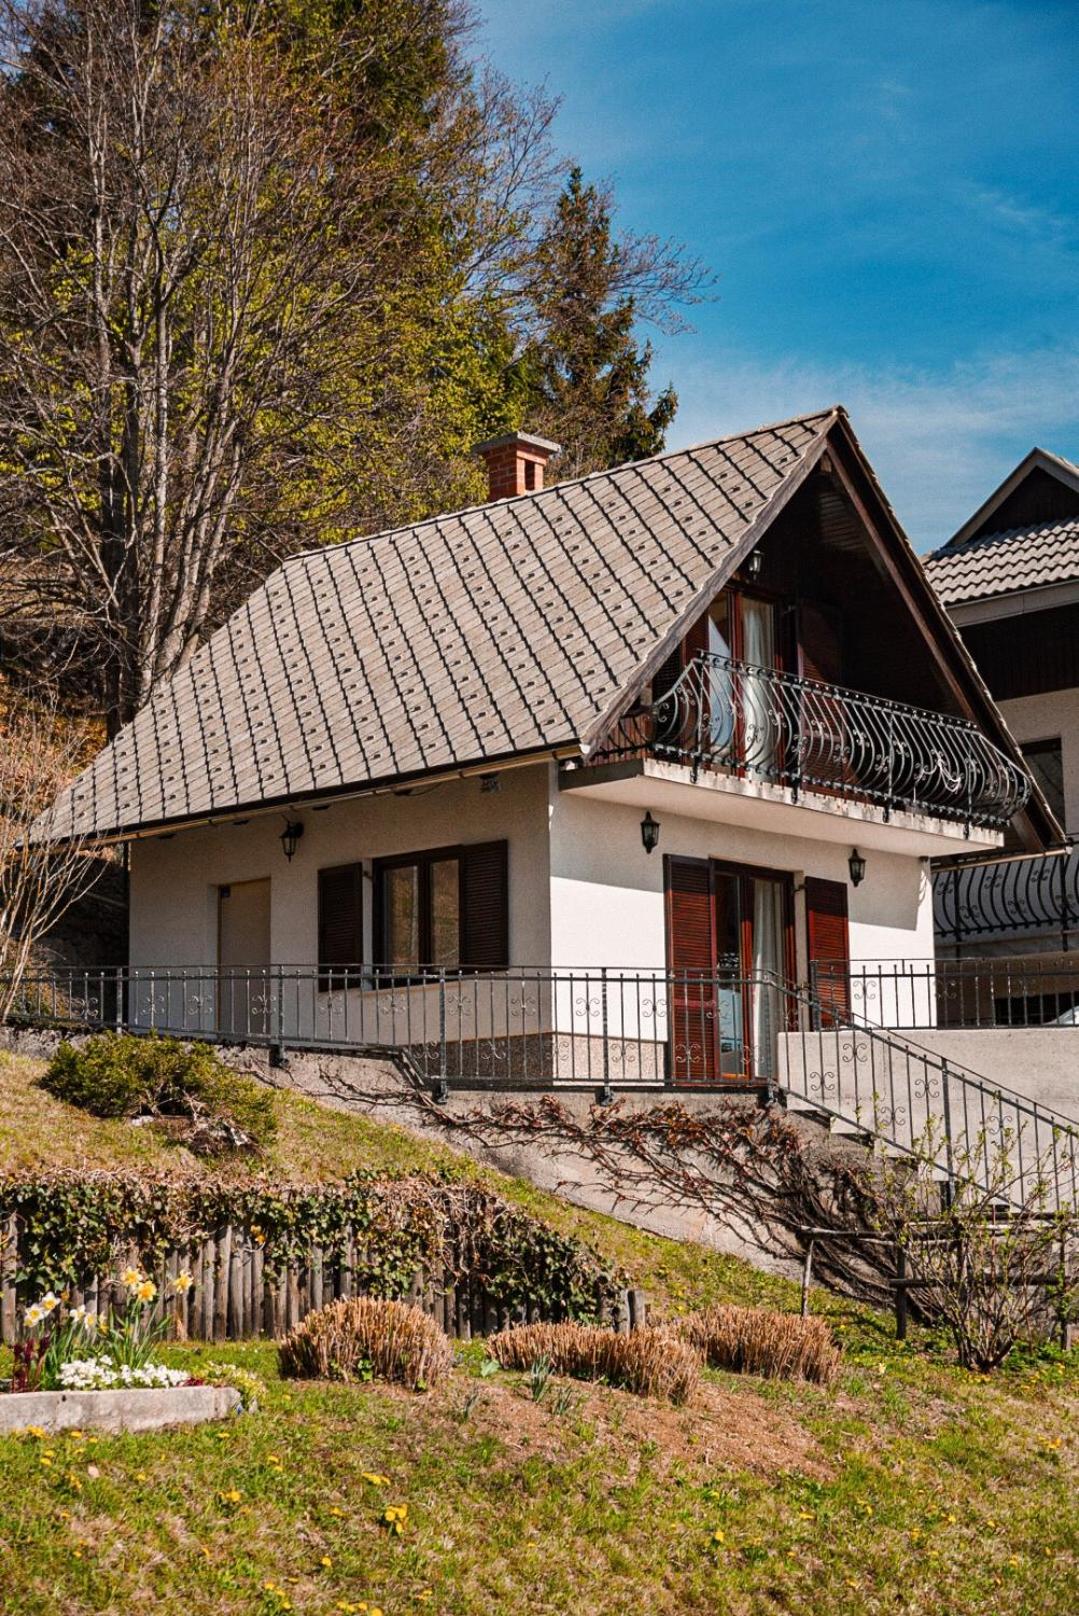 Lakeview Guesthouse & Chalet Bled